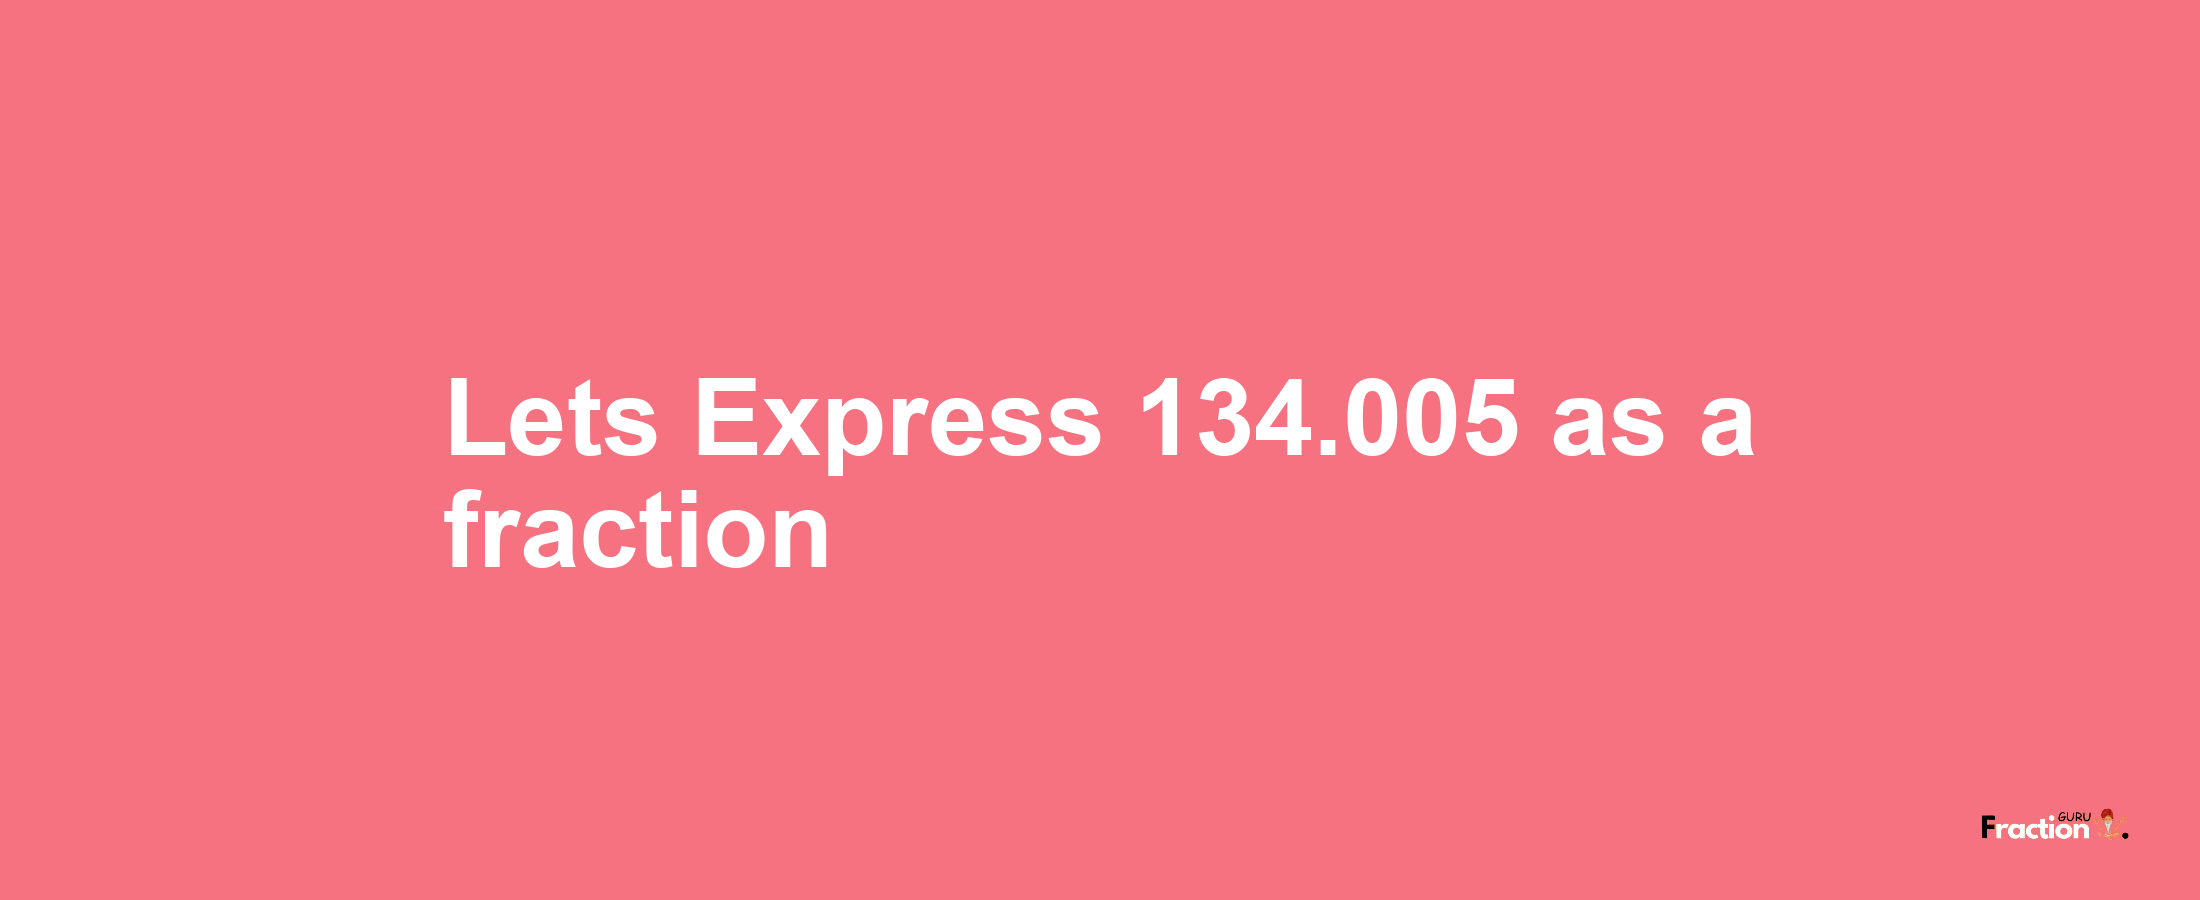 Lets Express 134.005 as afraction